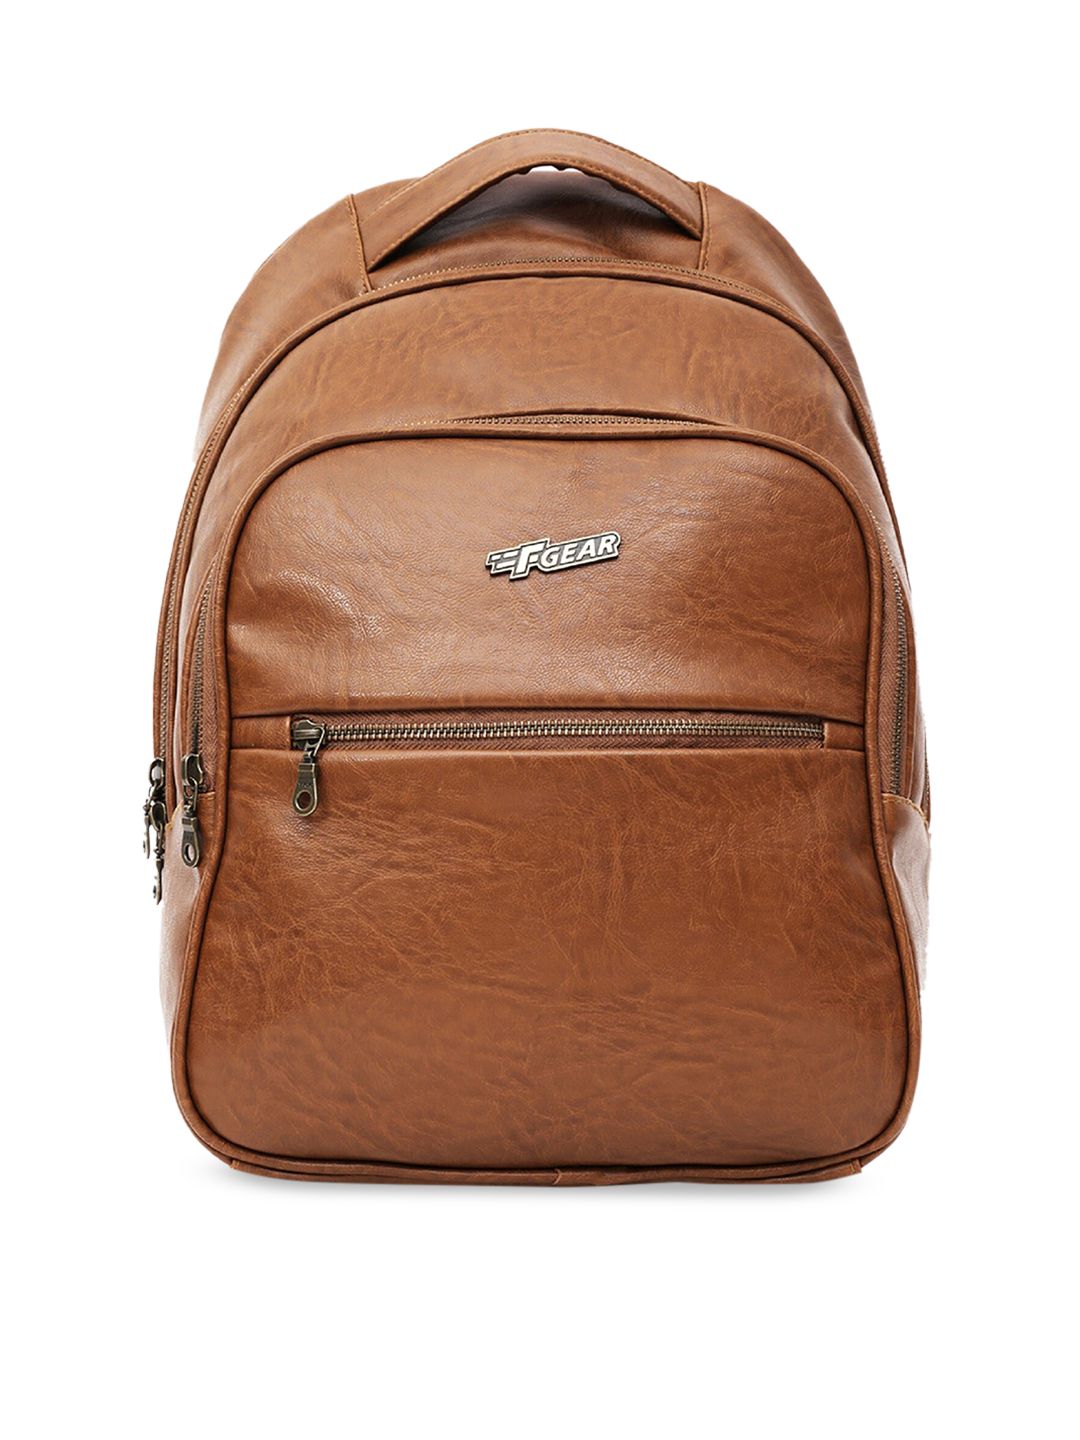 F Gear Unisex Camel Brown Solid Backpack Price in India